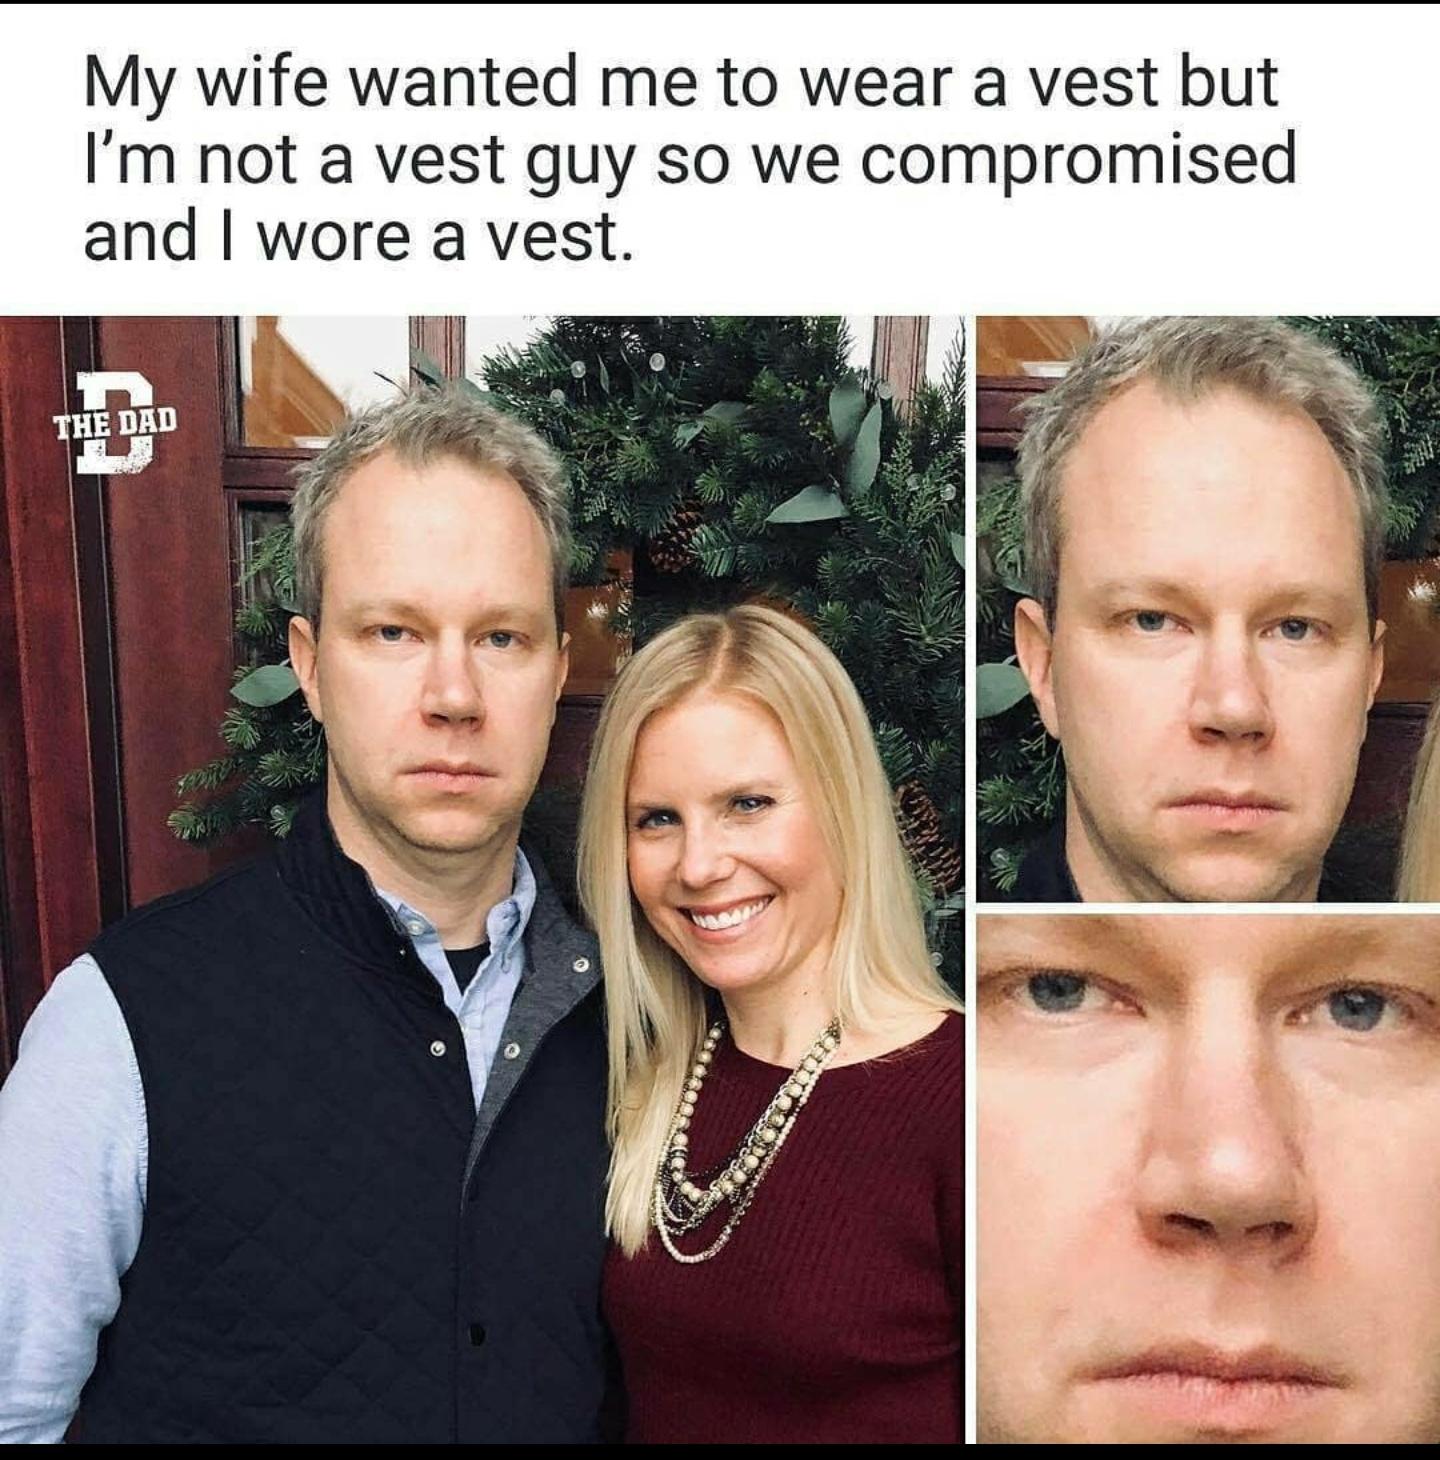 dad compromised and wore a vest - My wife wanted me to wear a vest but I'm not a vest guy so we compromised and I wore a vest. The Dad